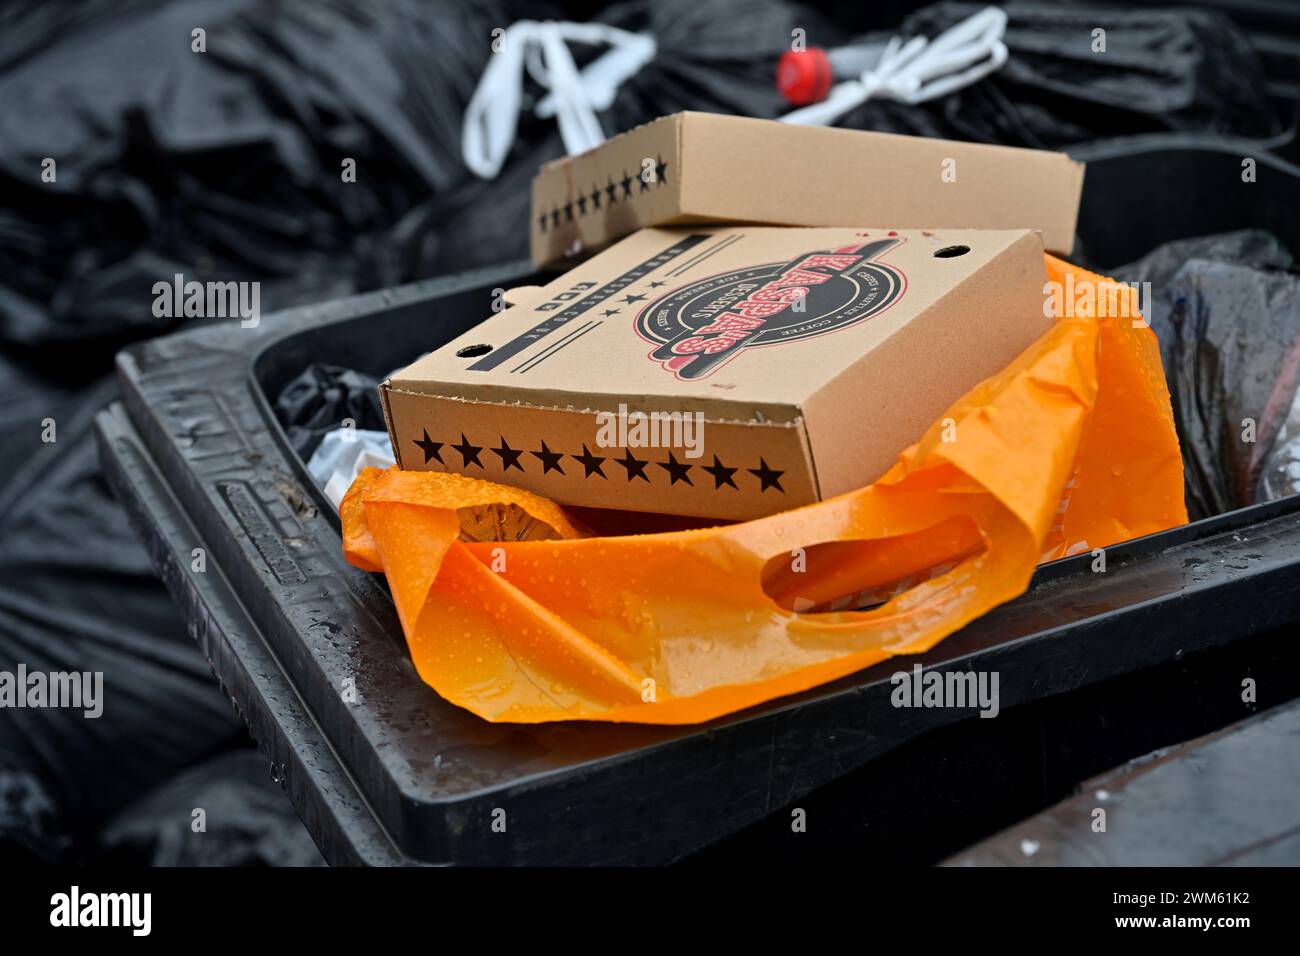 Overflowing waste bin with cardboard boxes and fly tipped rubbish, Bristol, UK Stock Photo